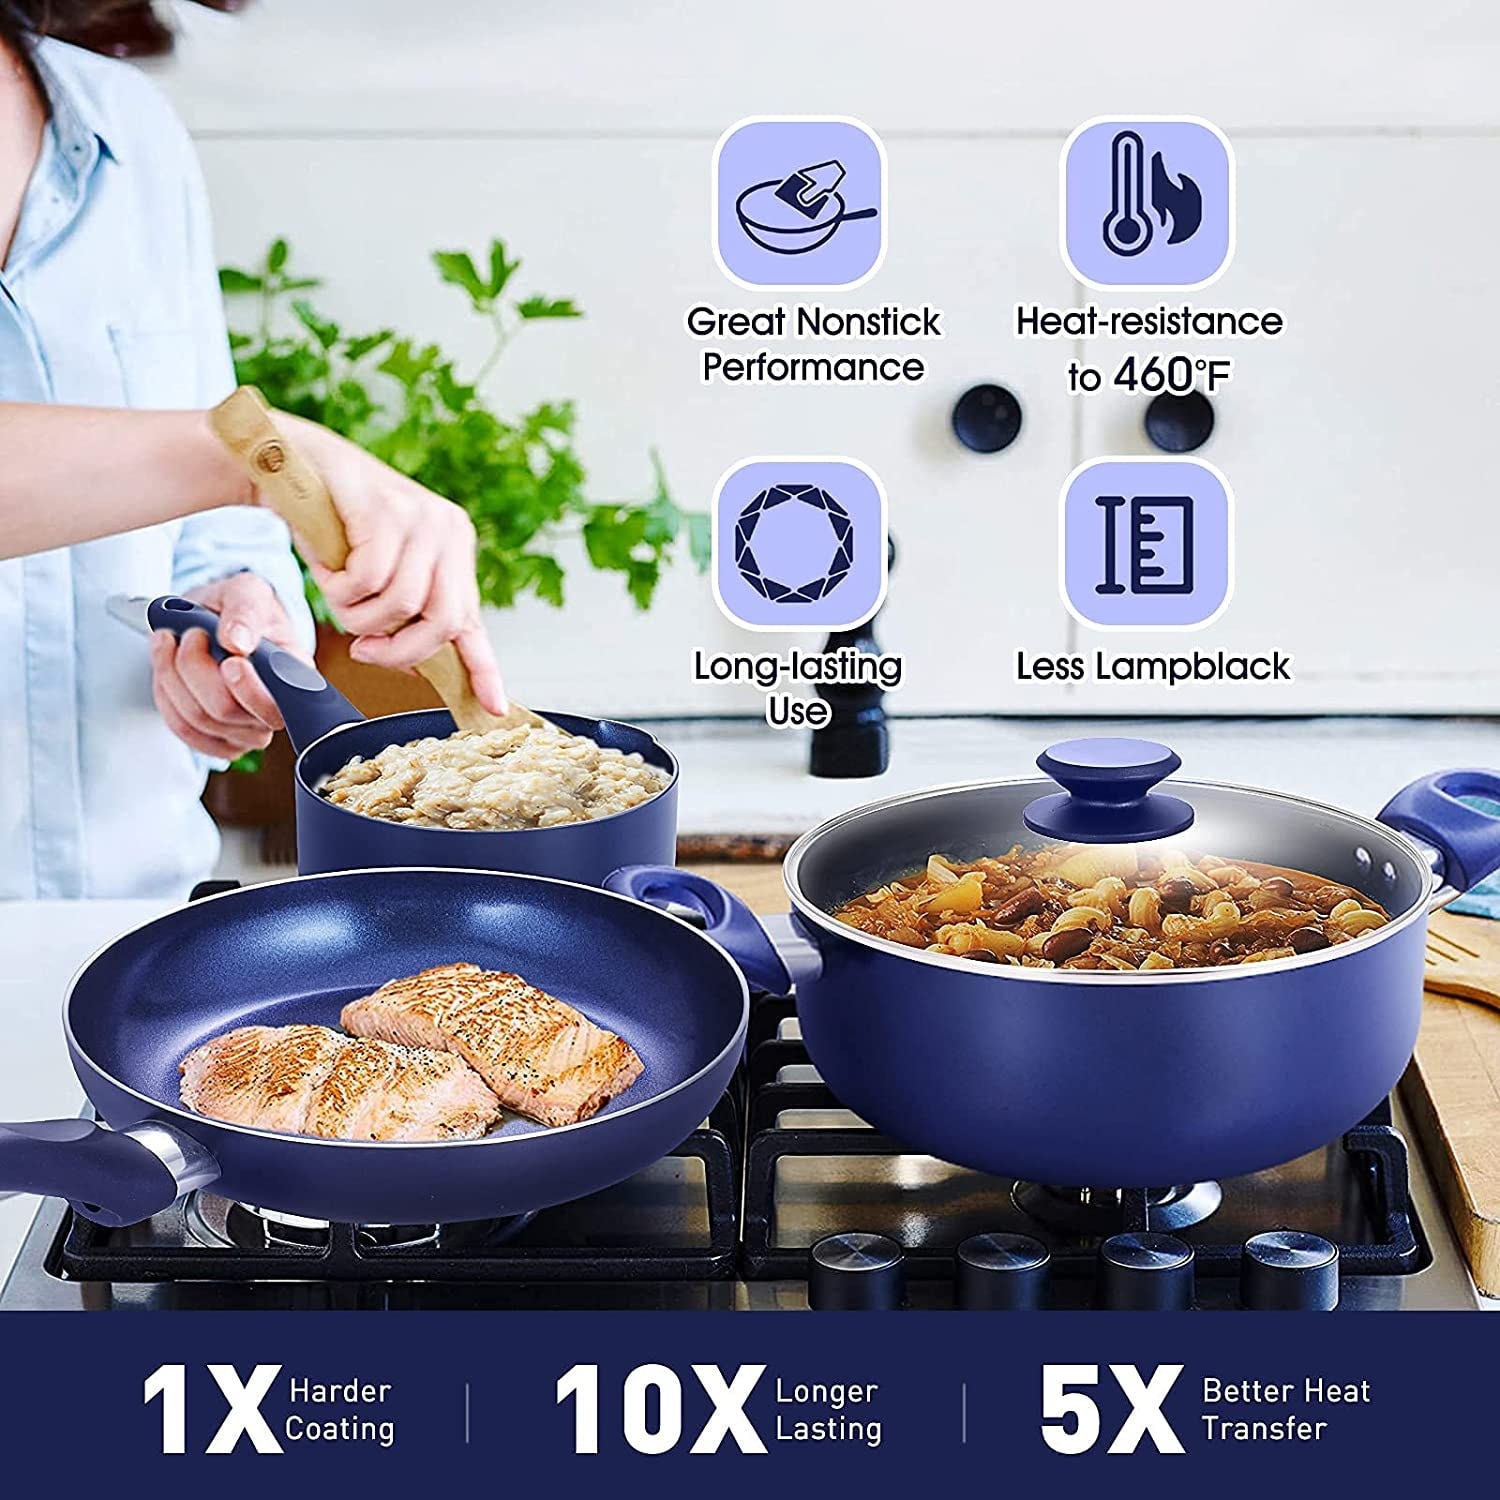 https://ak1.ostkcdn.com/images/products/is/images/direct/24853cb058b887f26b34a066323063c03b4cb46f/6-piece-Non-stick-Cookware-Set-Pots-and-Pans-Set-for-Cooking---Ceramic-Coating-Saucepan%2C-Stock-Pot-with-Lid%2C-Frying-Pan%2C-Copper.jpg